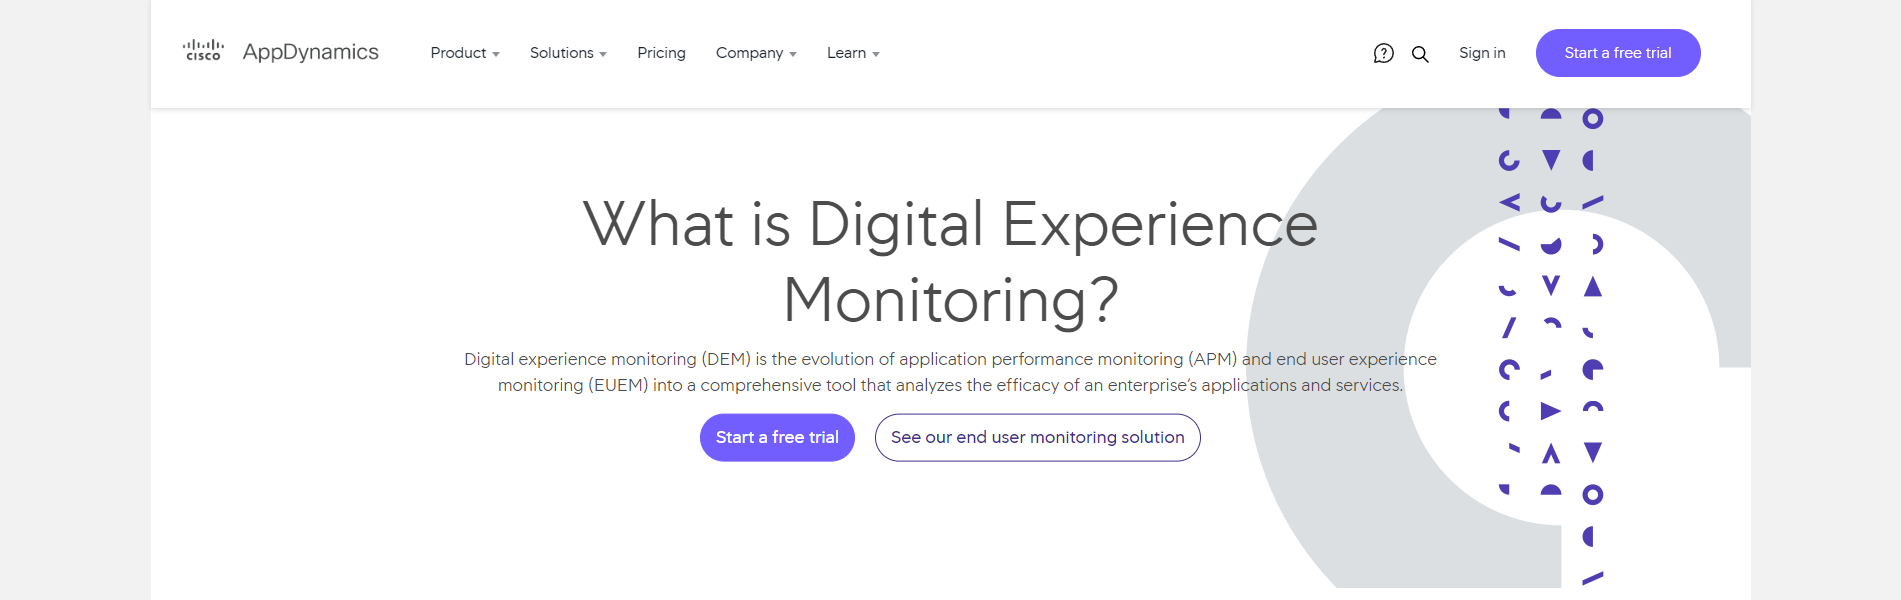 Cover image of Cisco AppDynamics Blog article on what is digital experience monitoring.